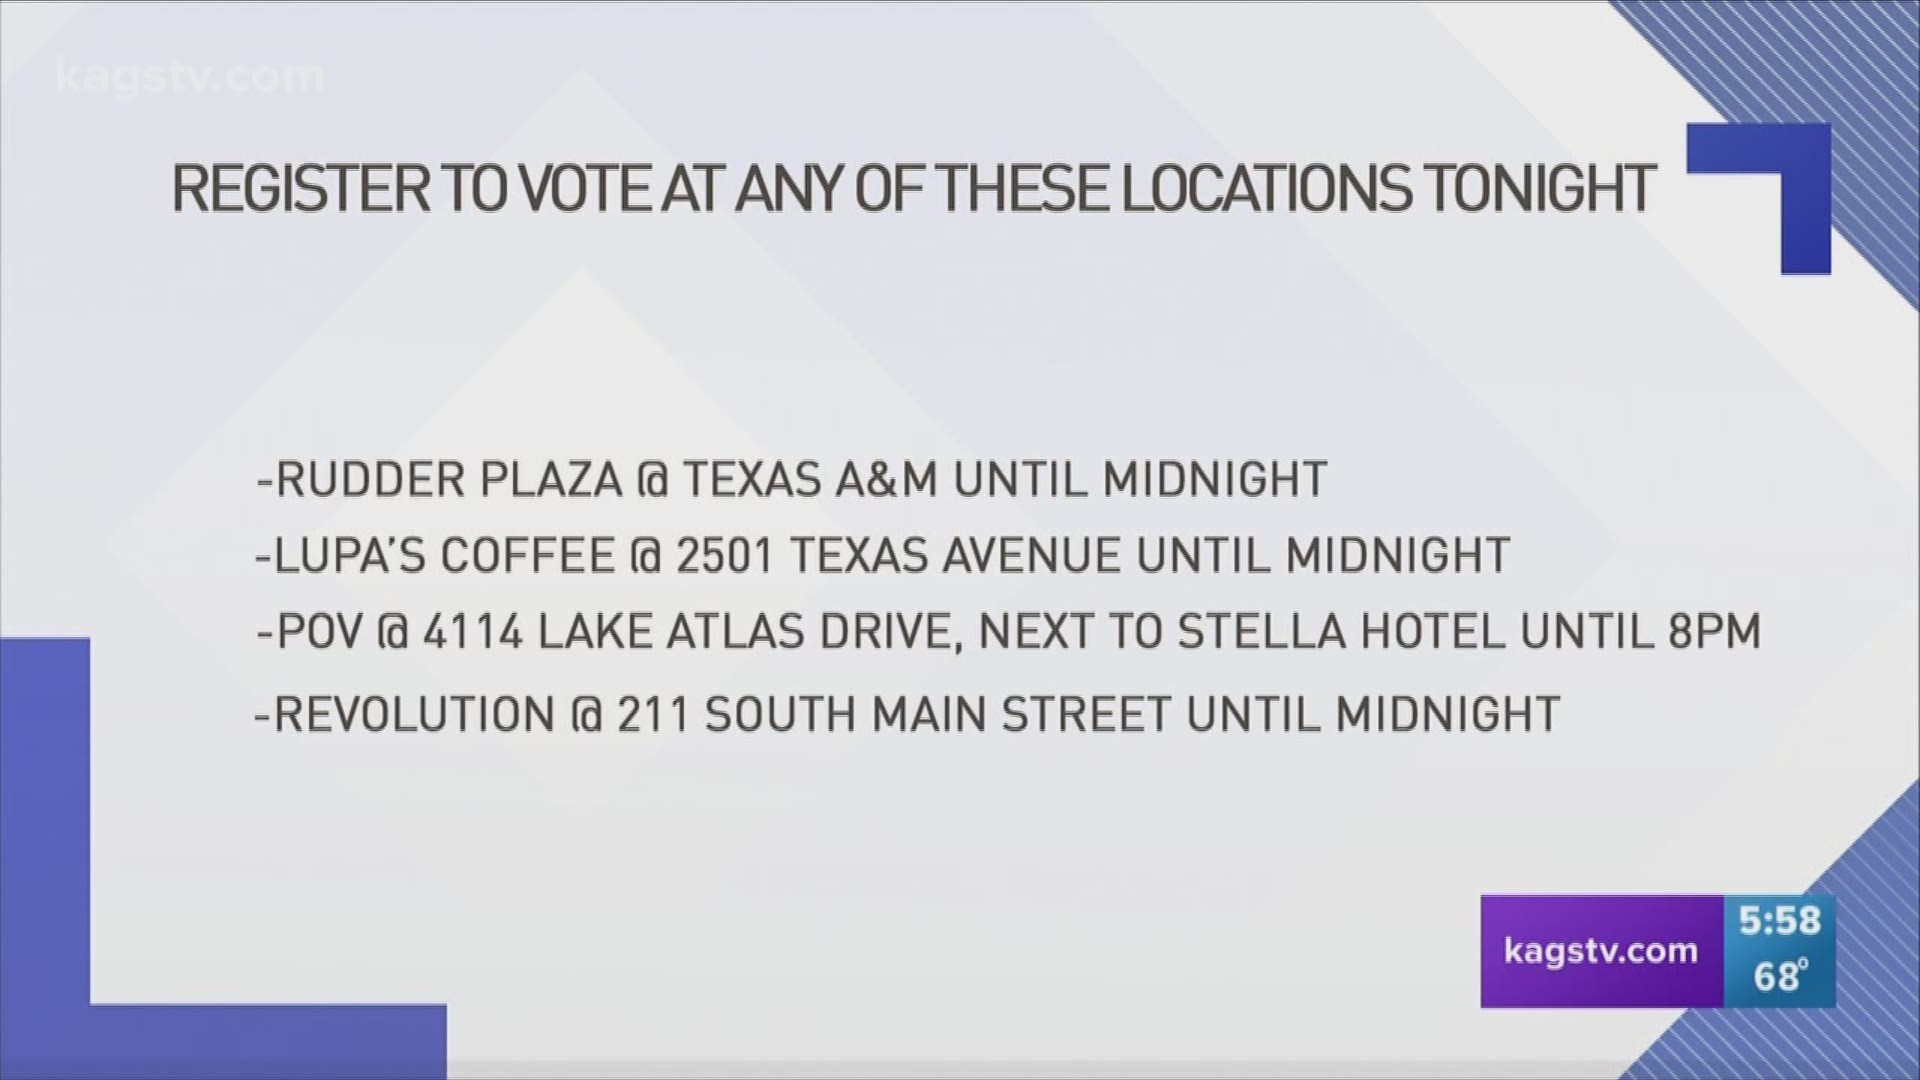 You have until midnight tonight to register to vote in Texas if you haven't already.